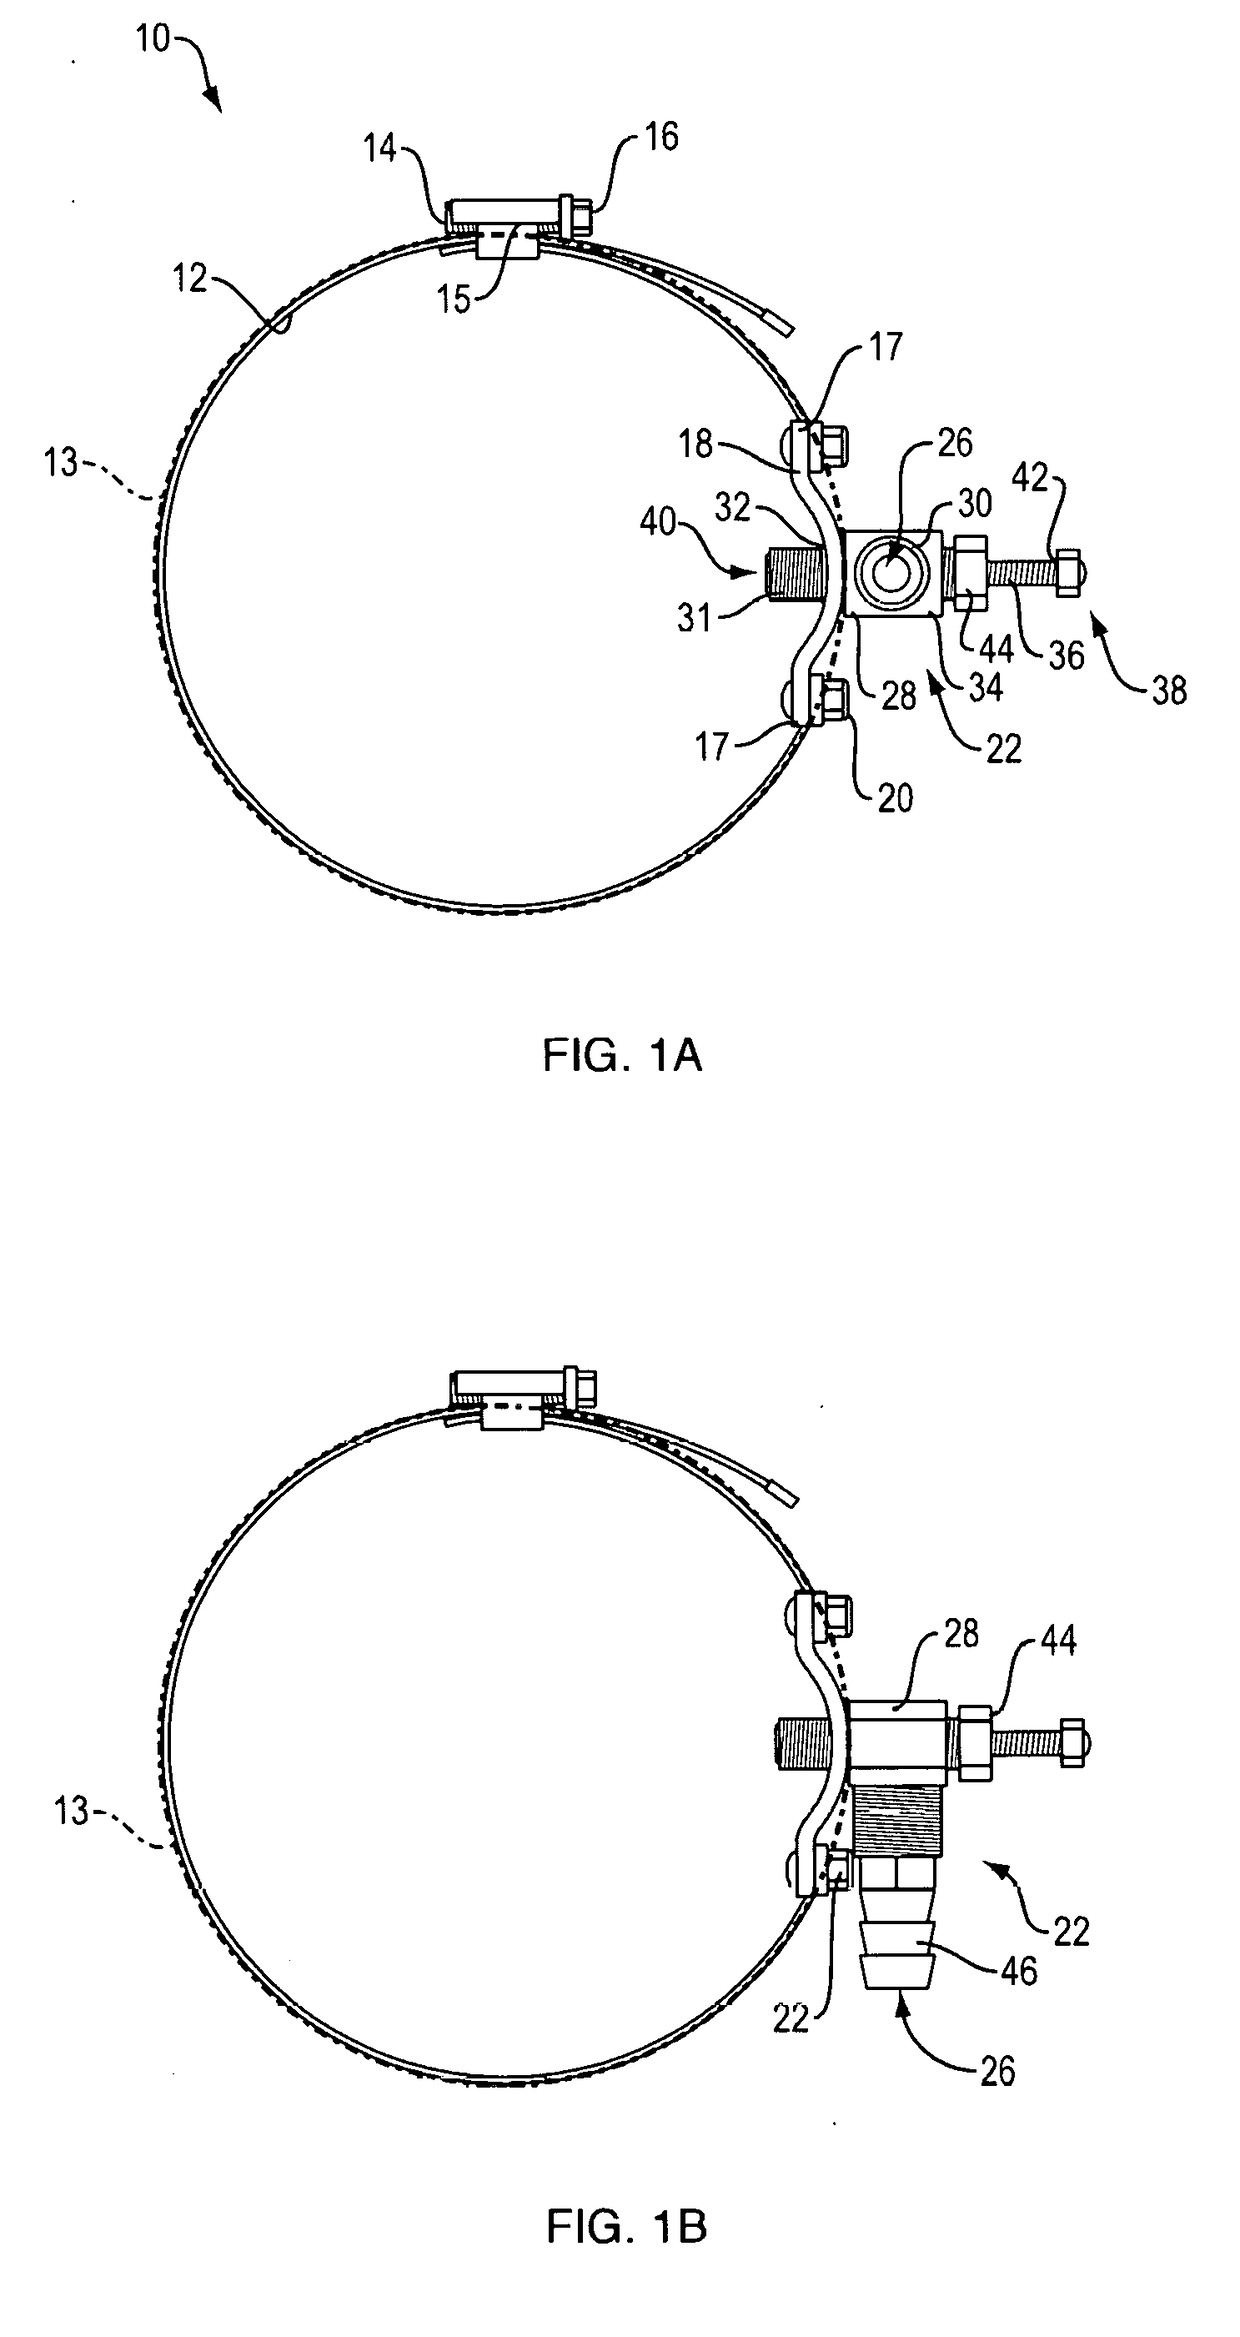 Fluid extractor device and kit